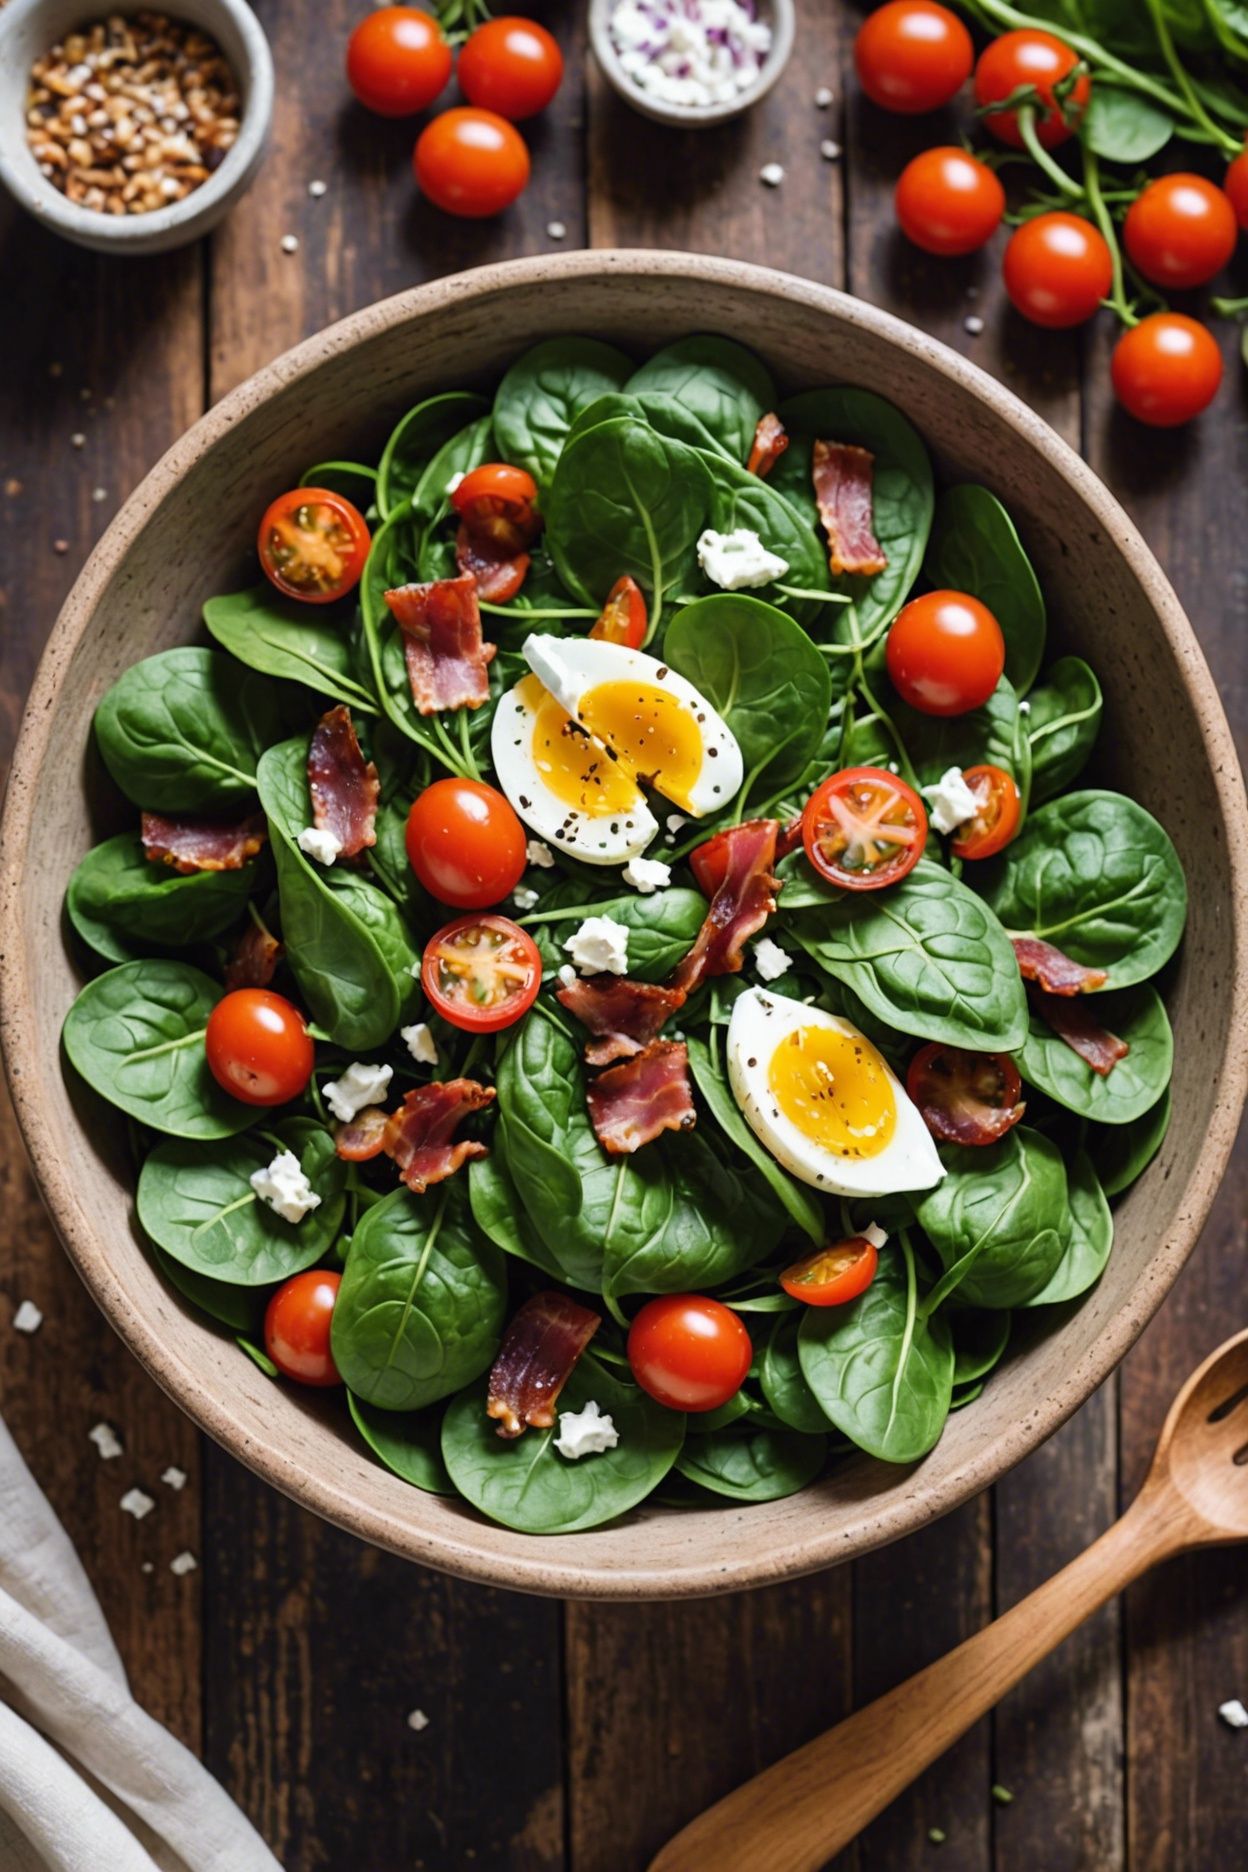 Warm Spinach Salad With Bacon Dressing